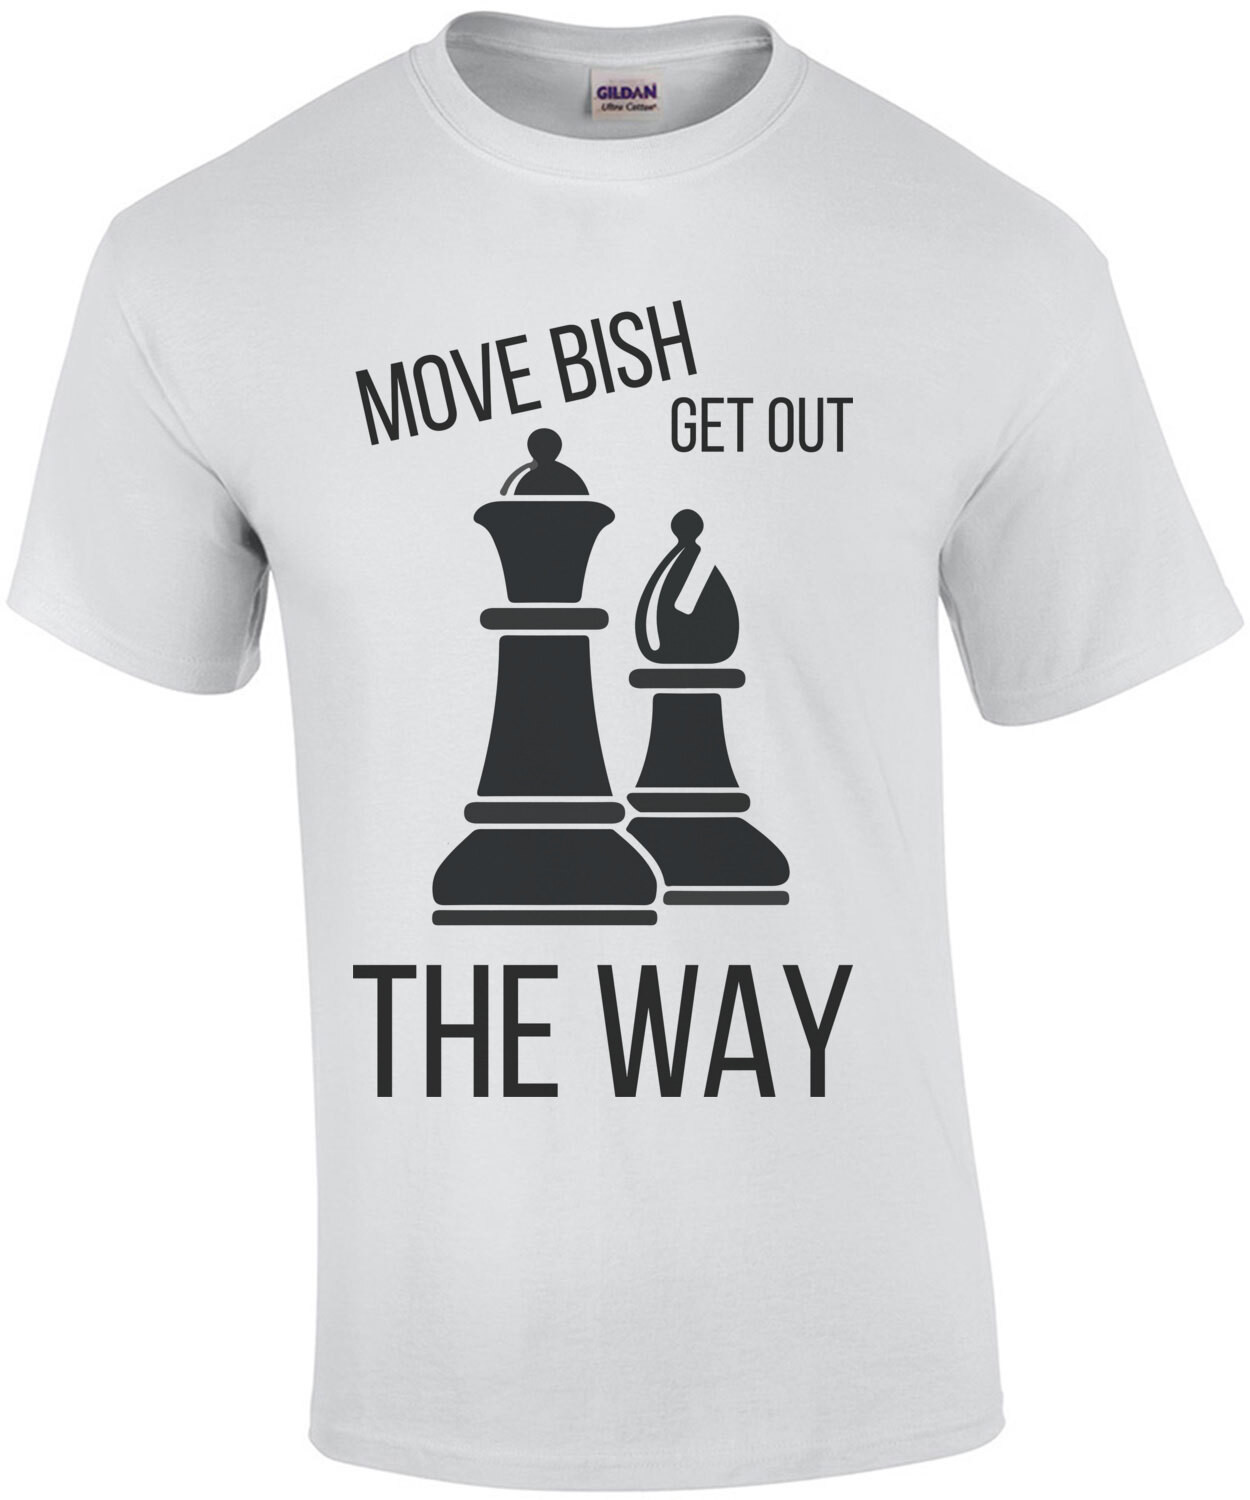 Move Bish Get Out The Way - Parody Chess T-Shirt